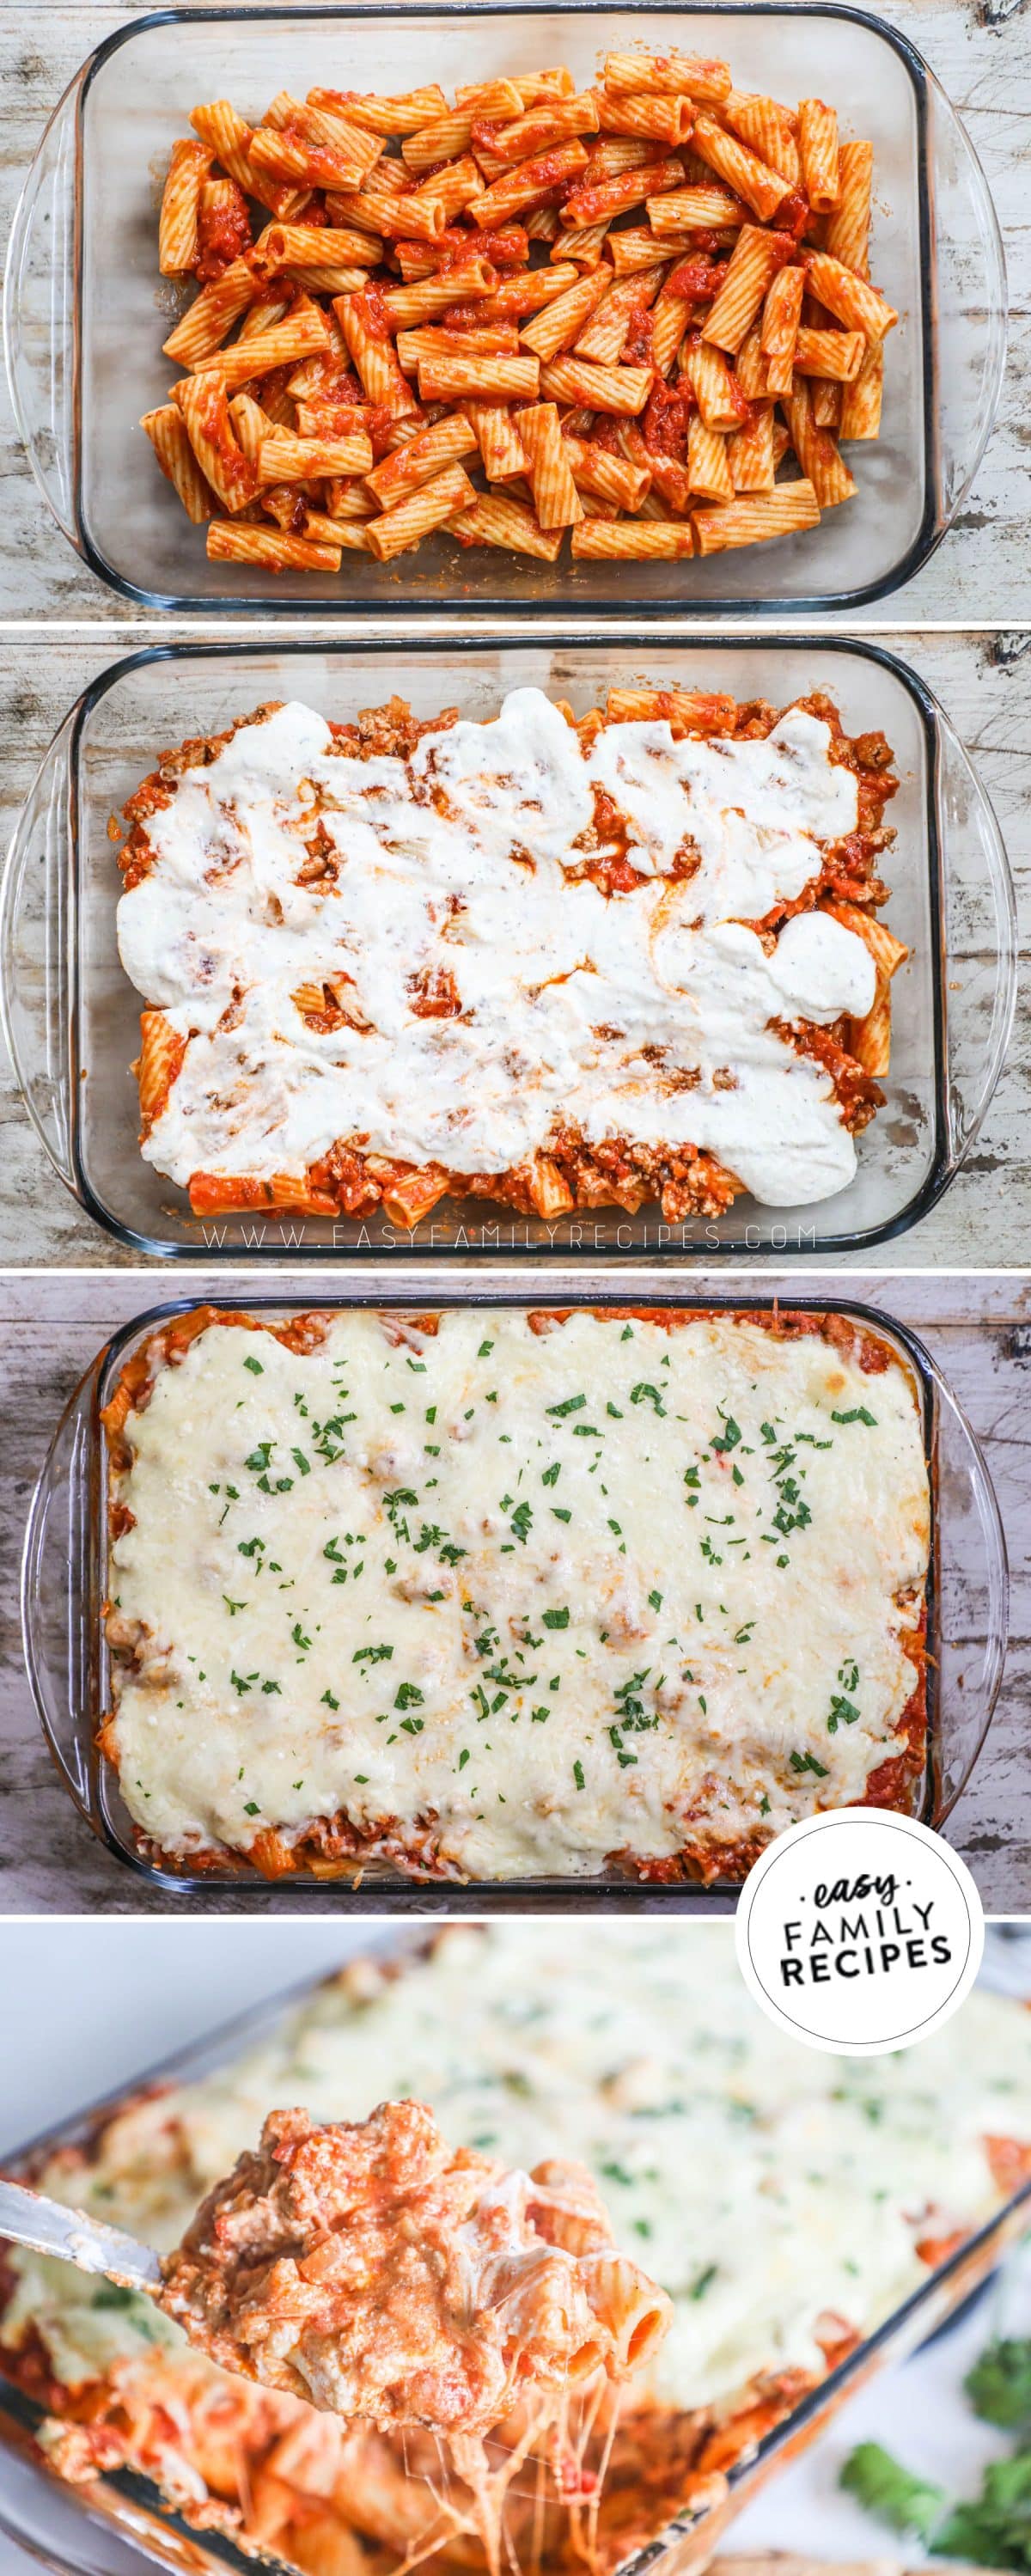 how to make ground turkey baked ziti 1)sauce and layer pasta in pan 2)top with cheese and meat 3)repeat layers 4)bake and serve